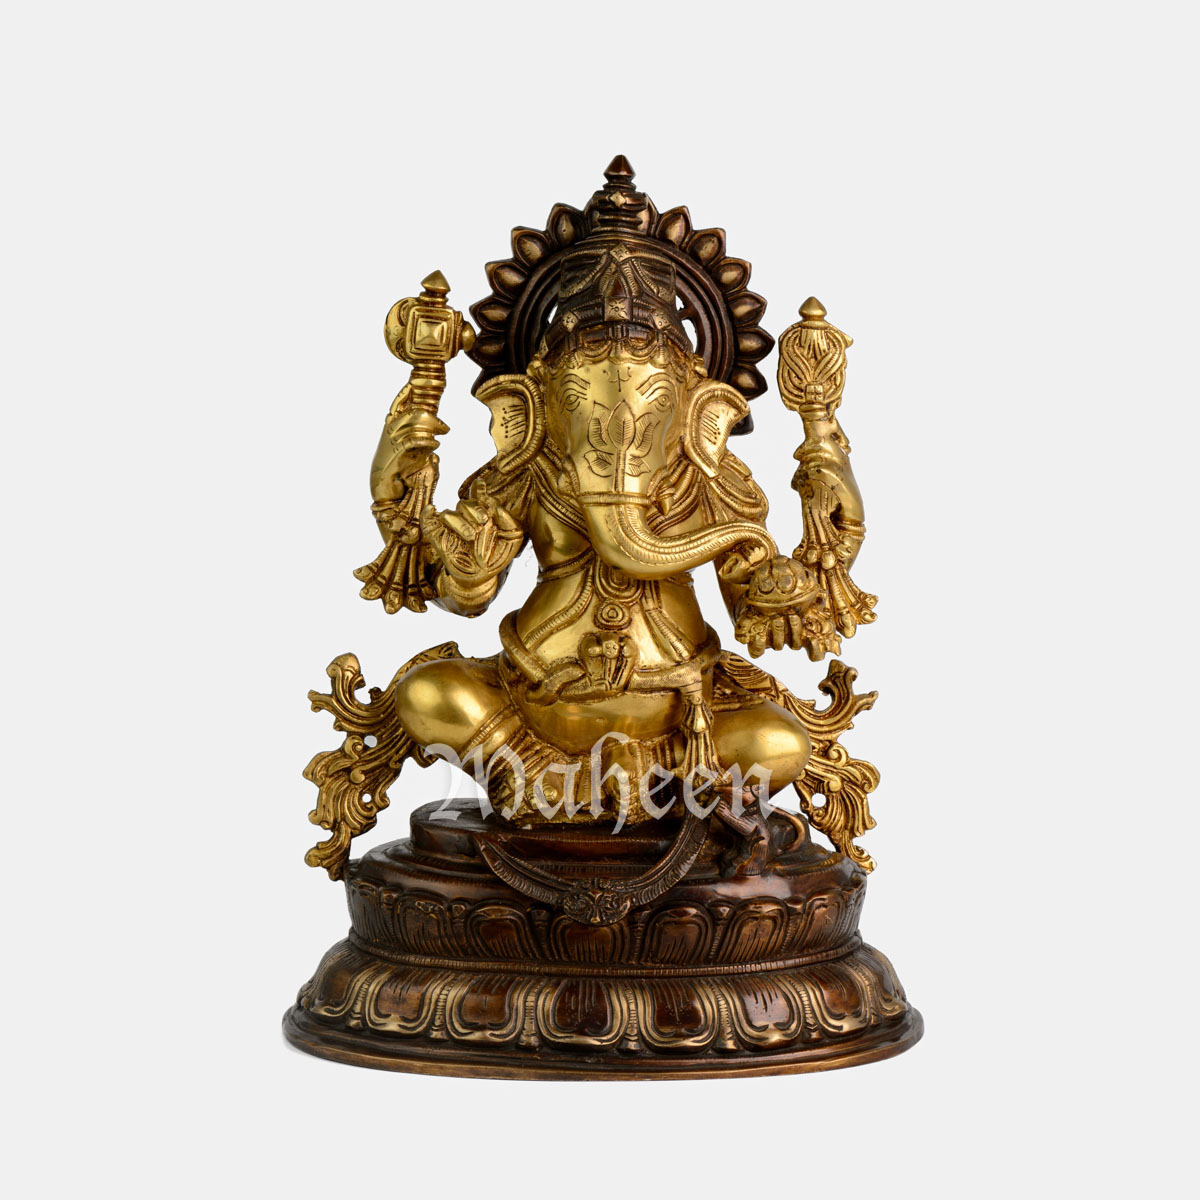 Brass Ganesha – With Ornate Carvings, Seated On Oval Lotus Base